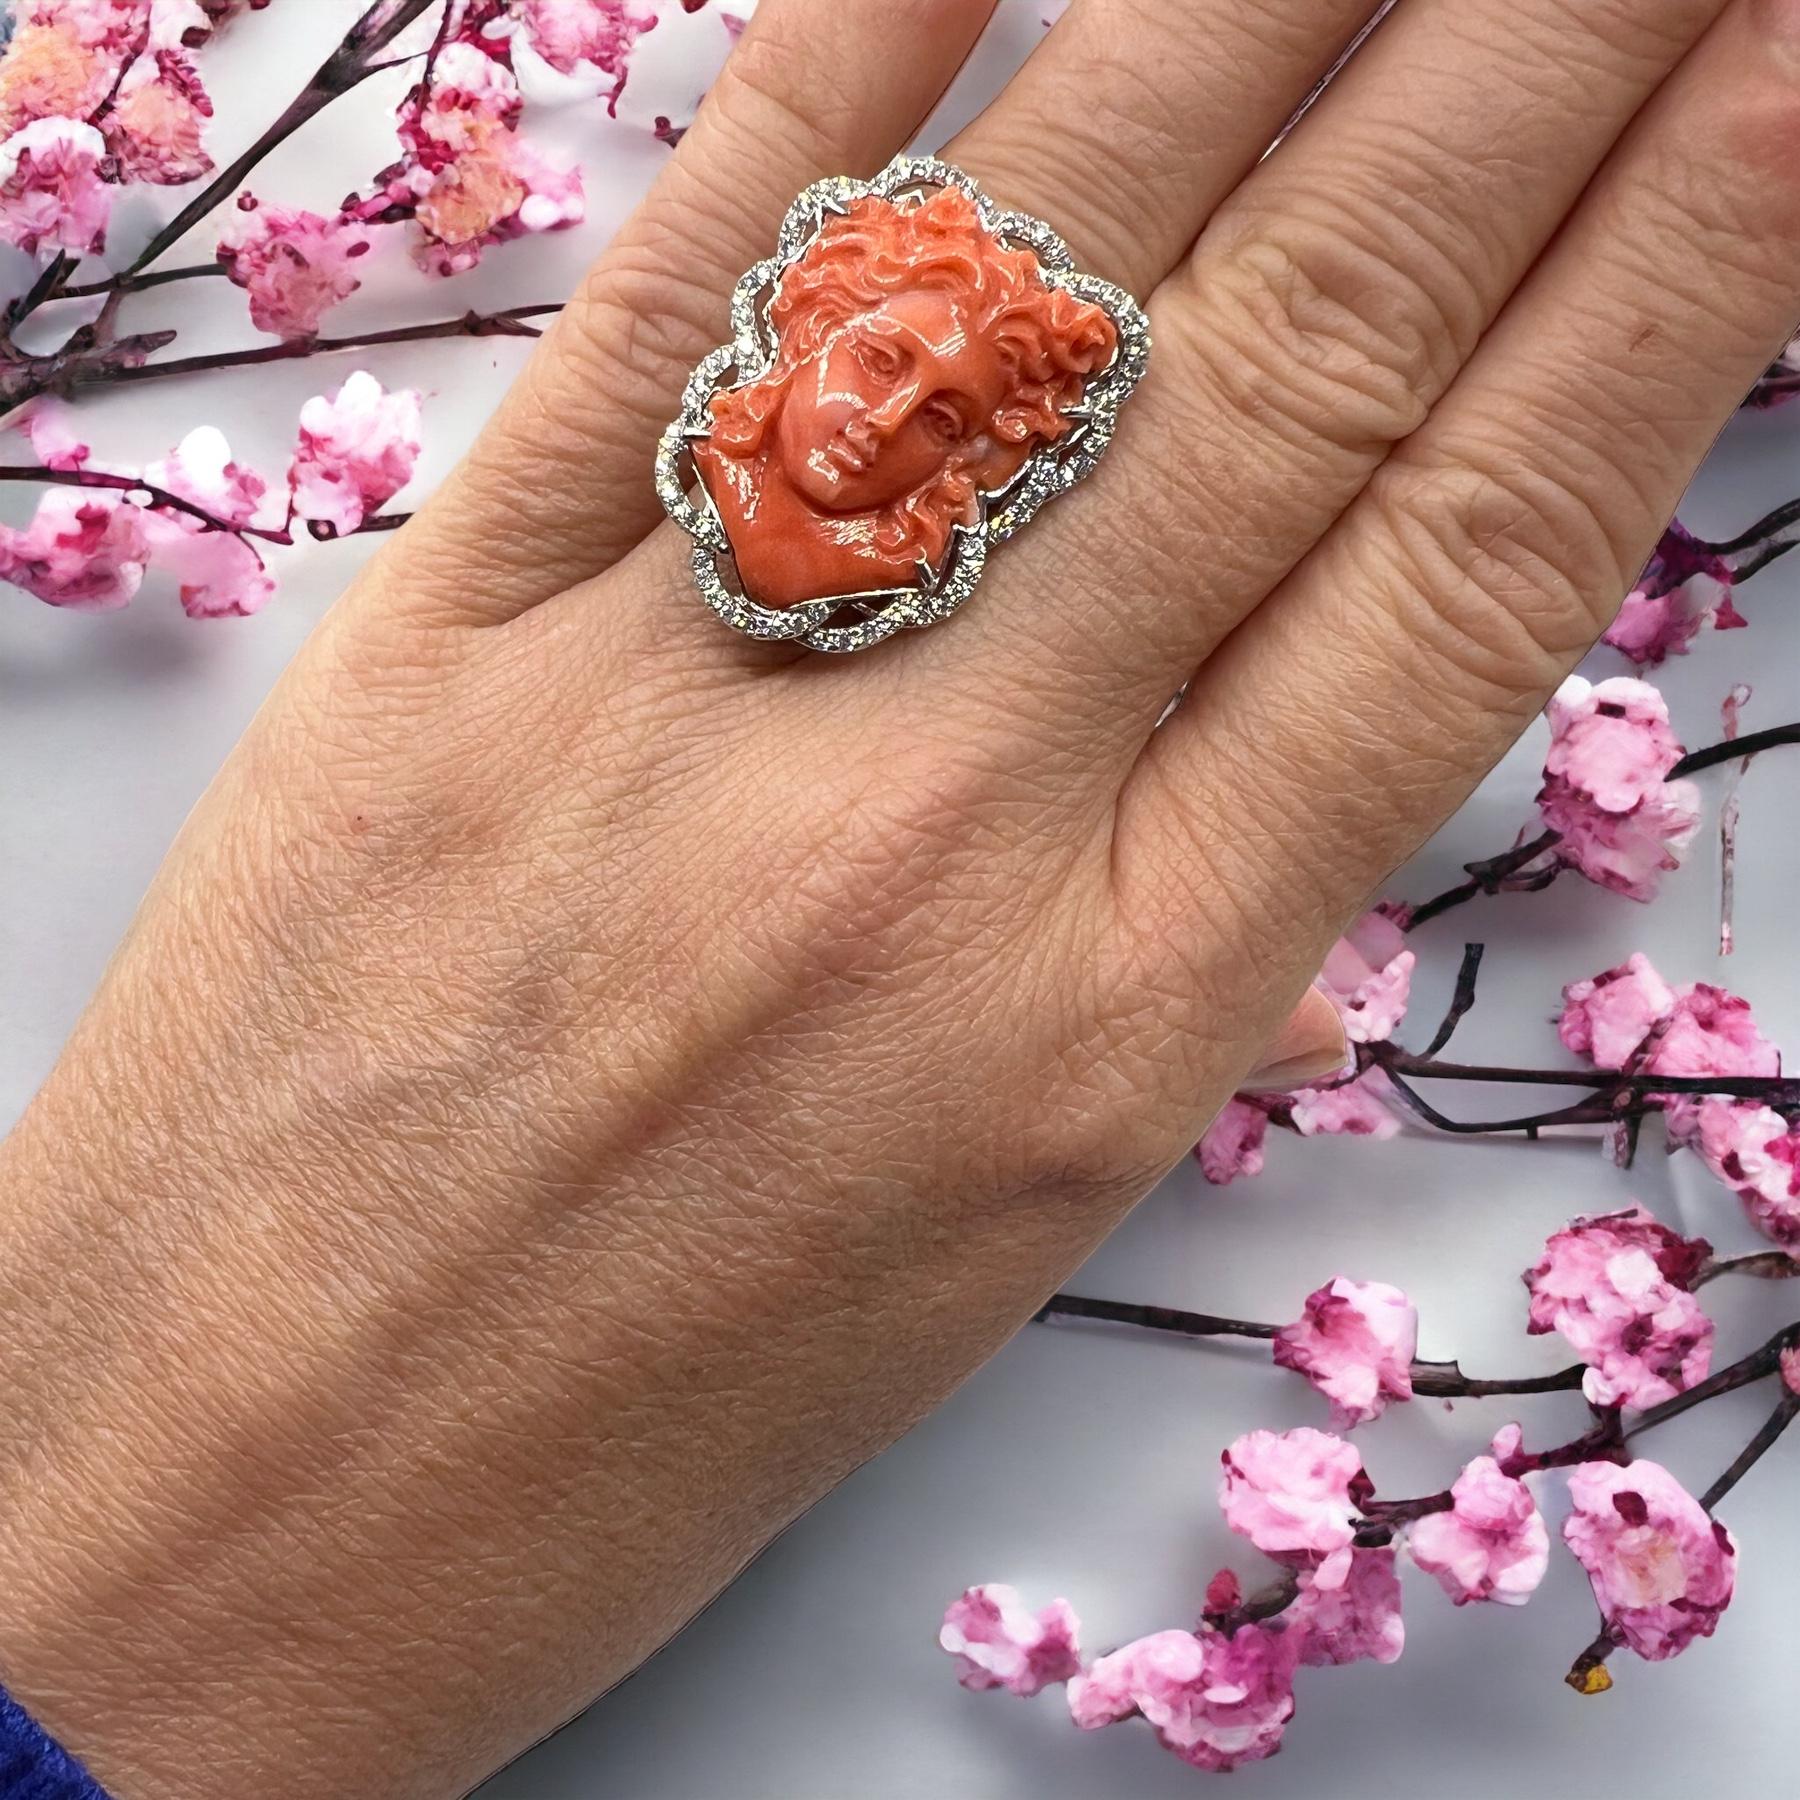 18 Carat Gold Cocktail Ring: Coral Cameo Ring Surrounded by Diamonds 3